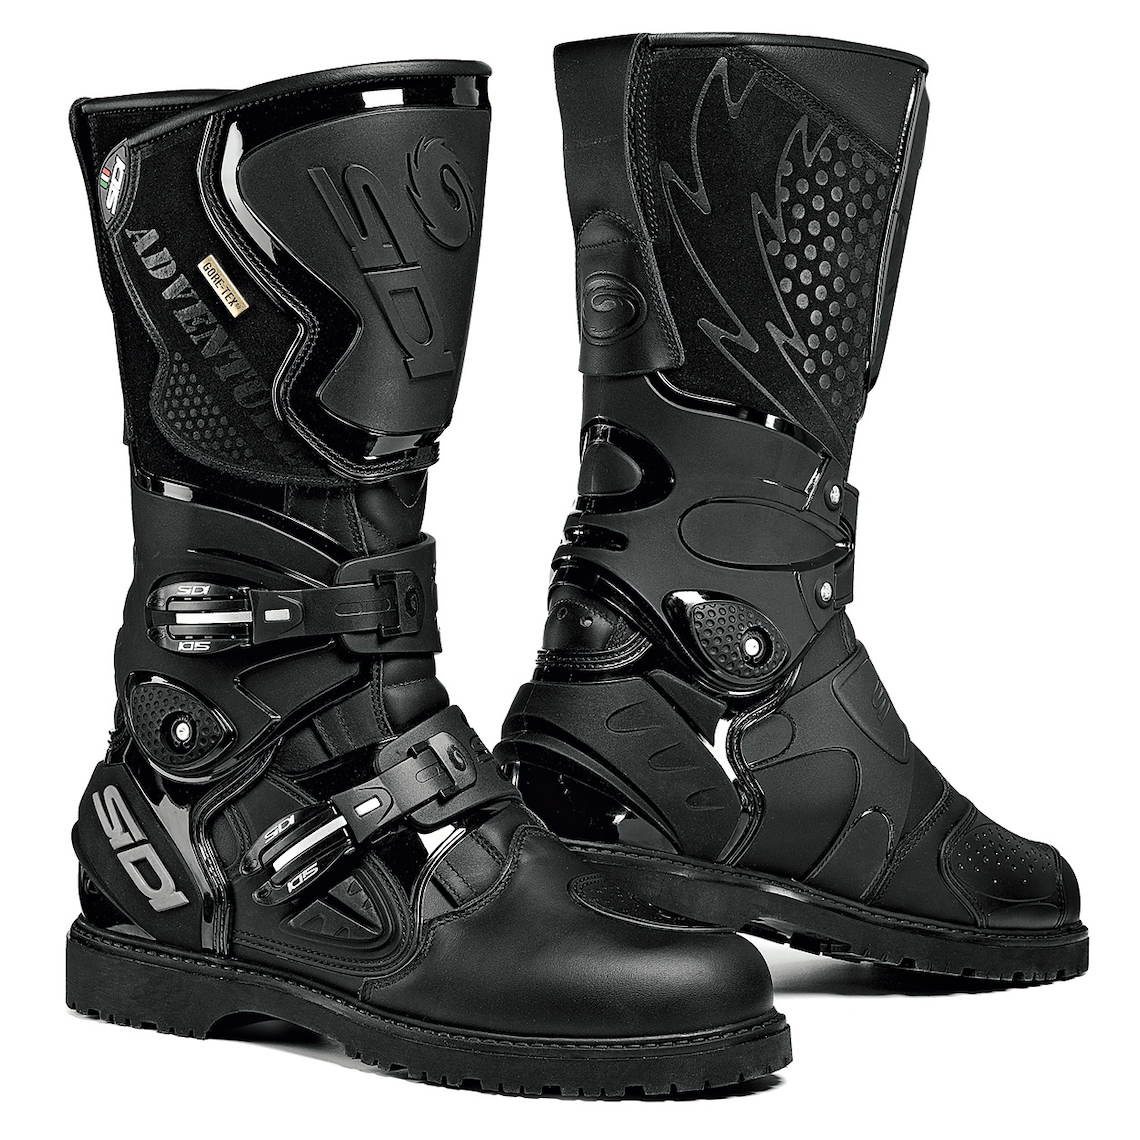 How to buy: Touring Boots - Adventure Bike Rider